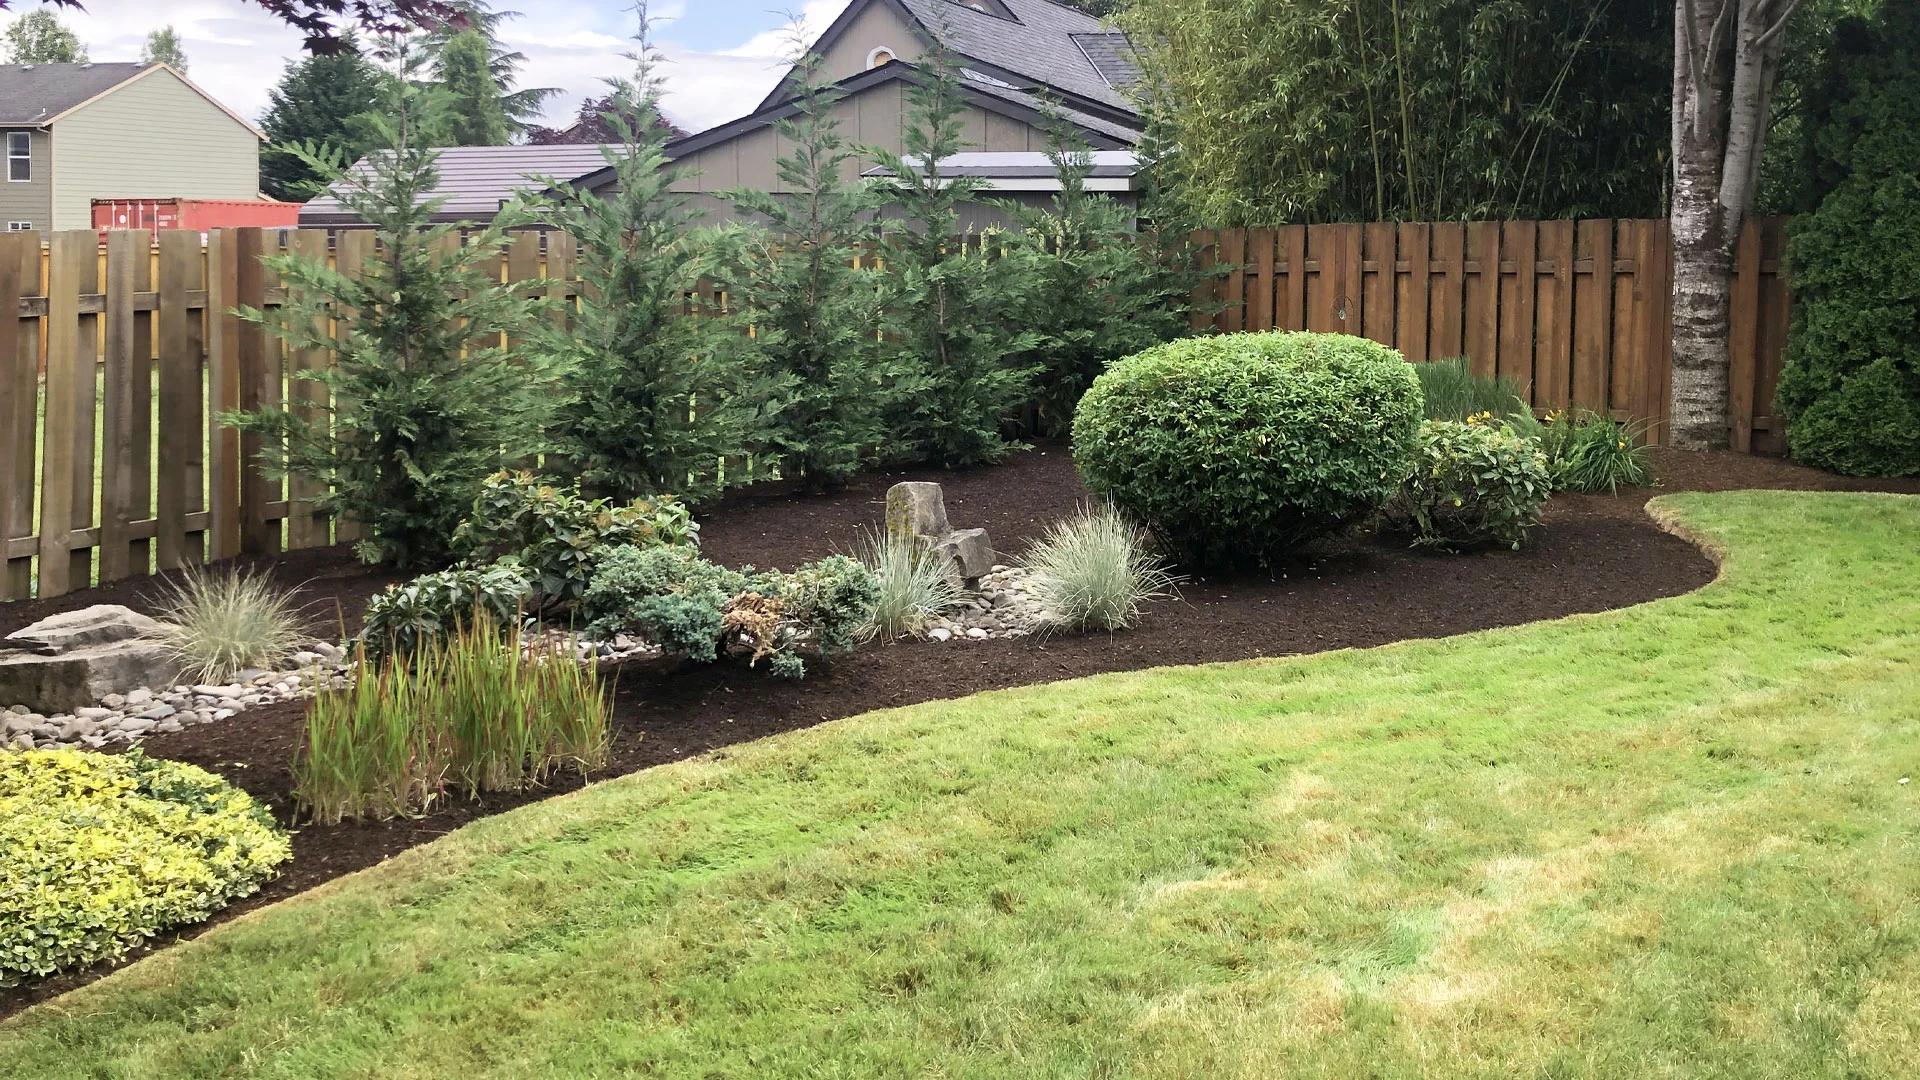 New landscaping installed at a home in Gresham, OR.